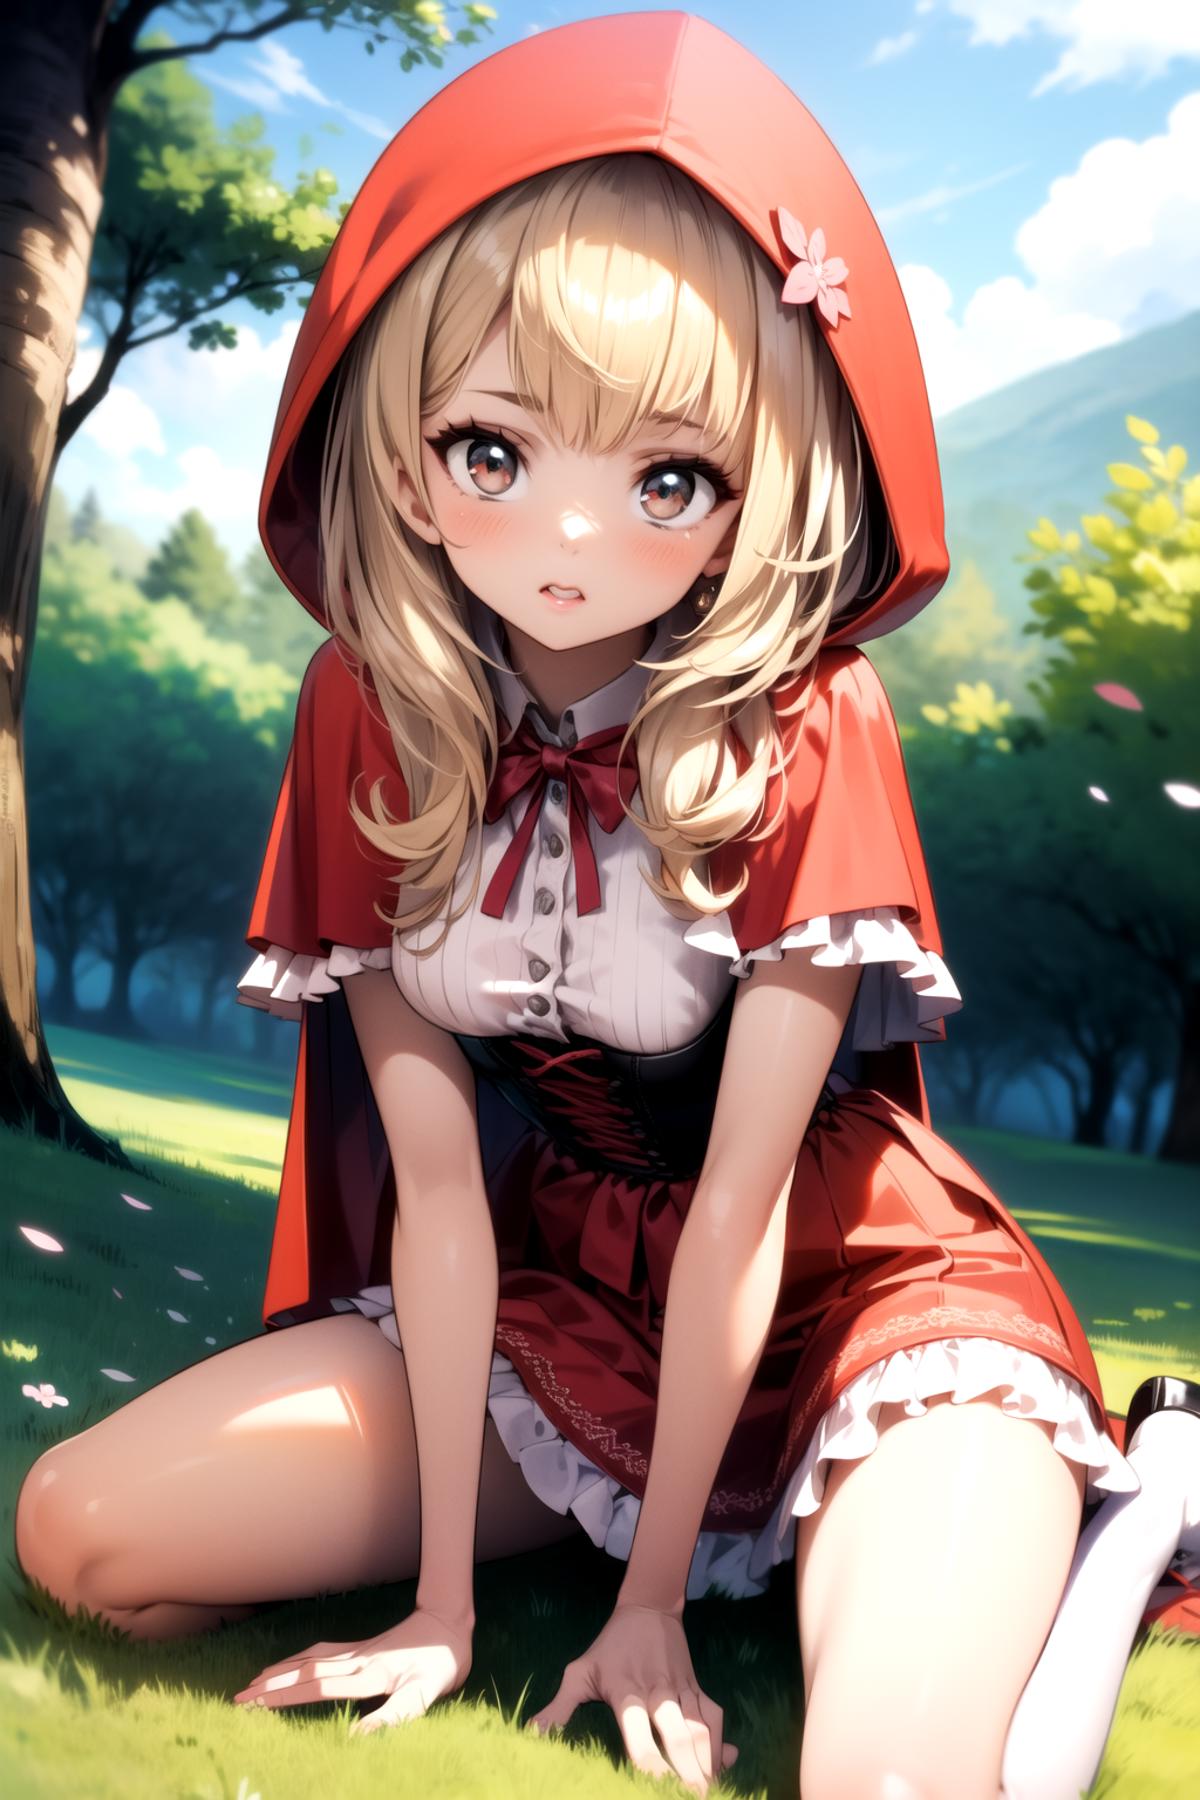 Little red riding hood image by psoft